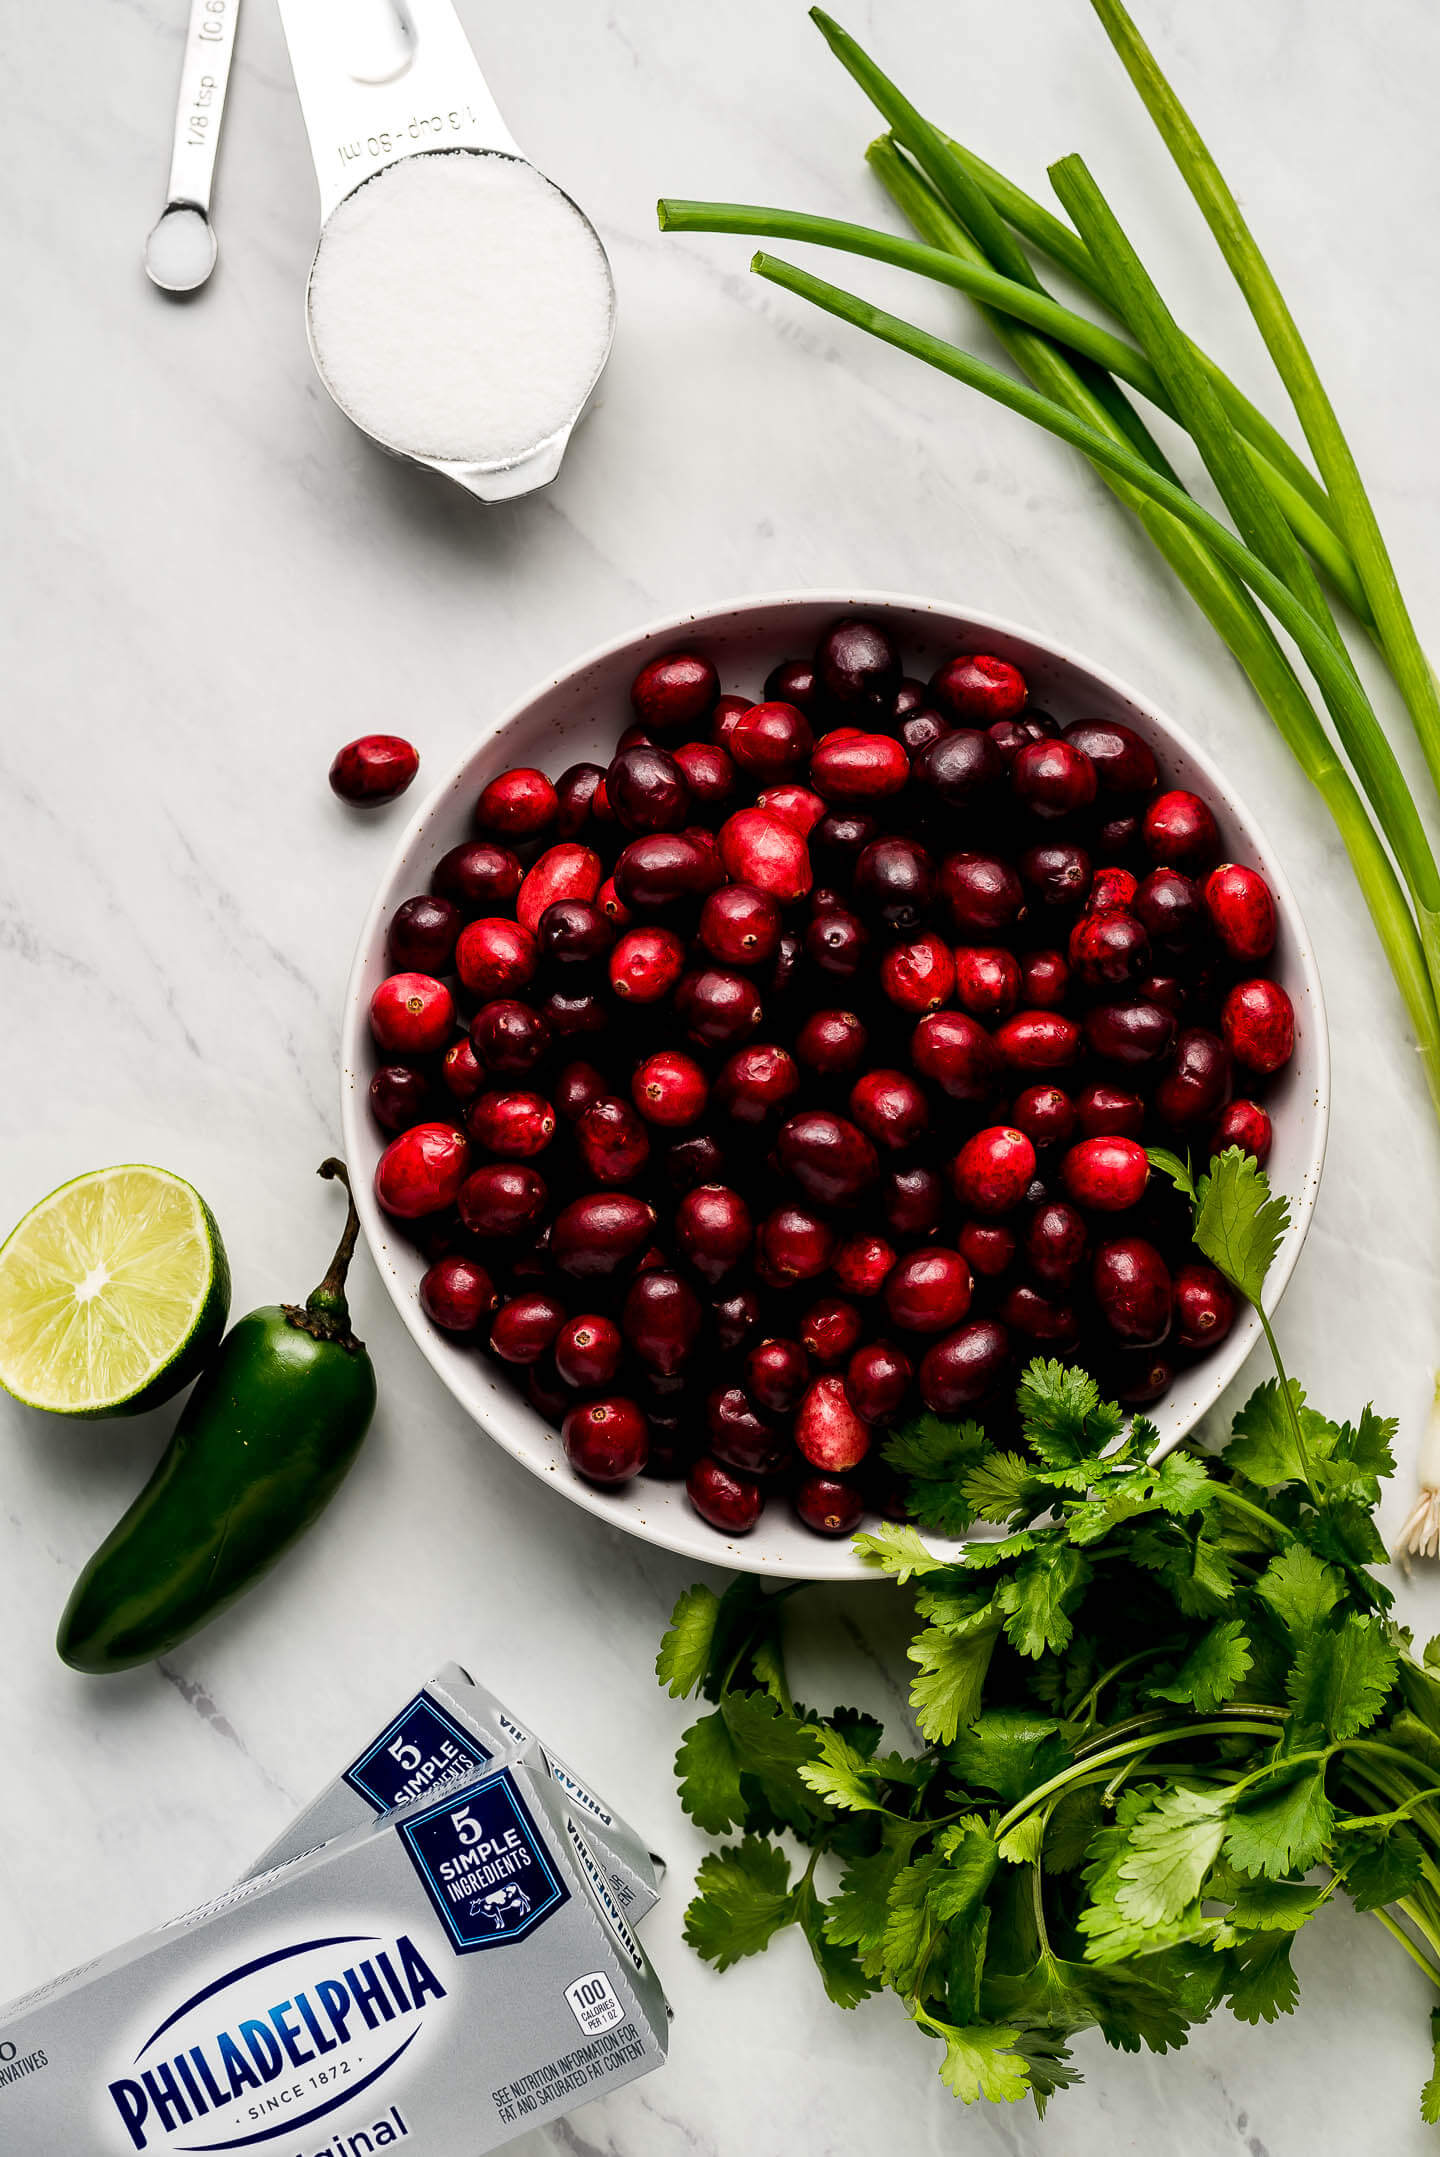 Ingredients on marble surface- bowl or cranberries, sugar, green onions, lime, jalapeno, cilantro, and cream cheese.